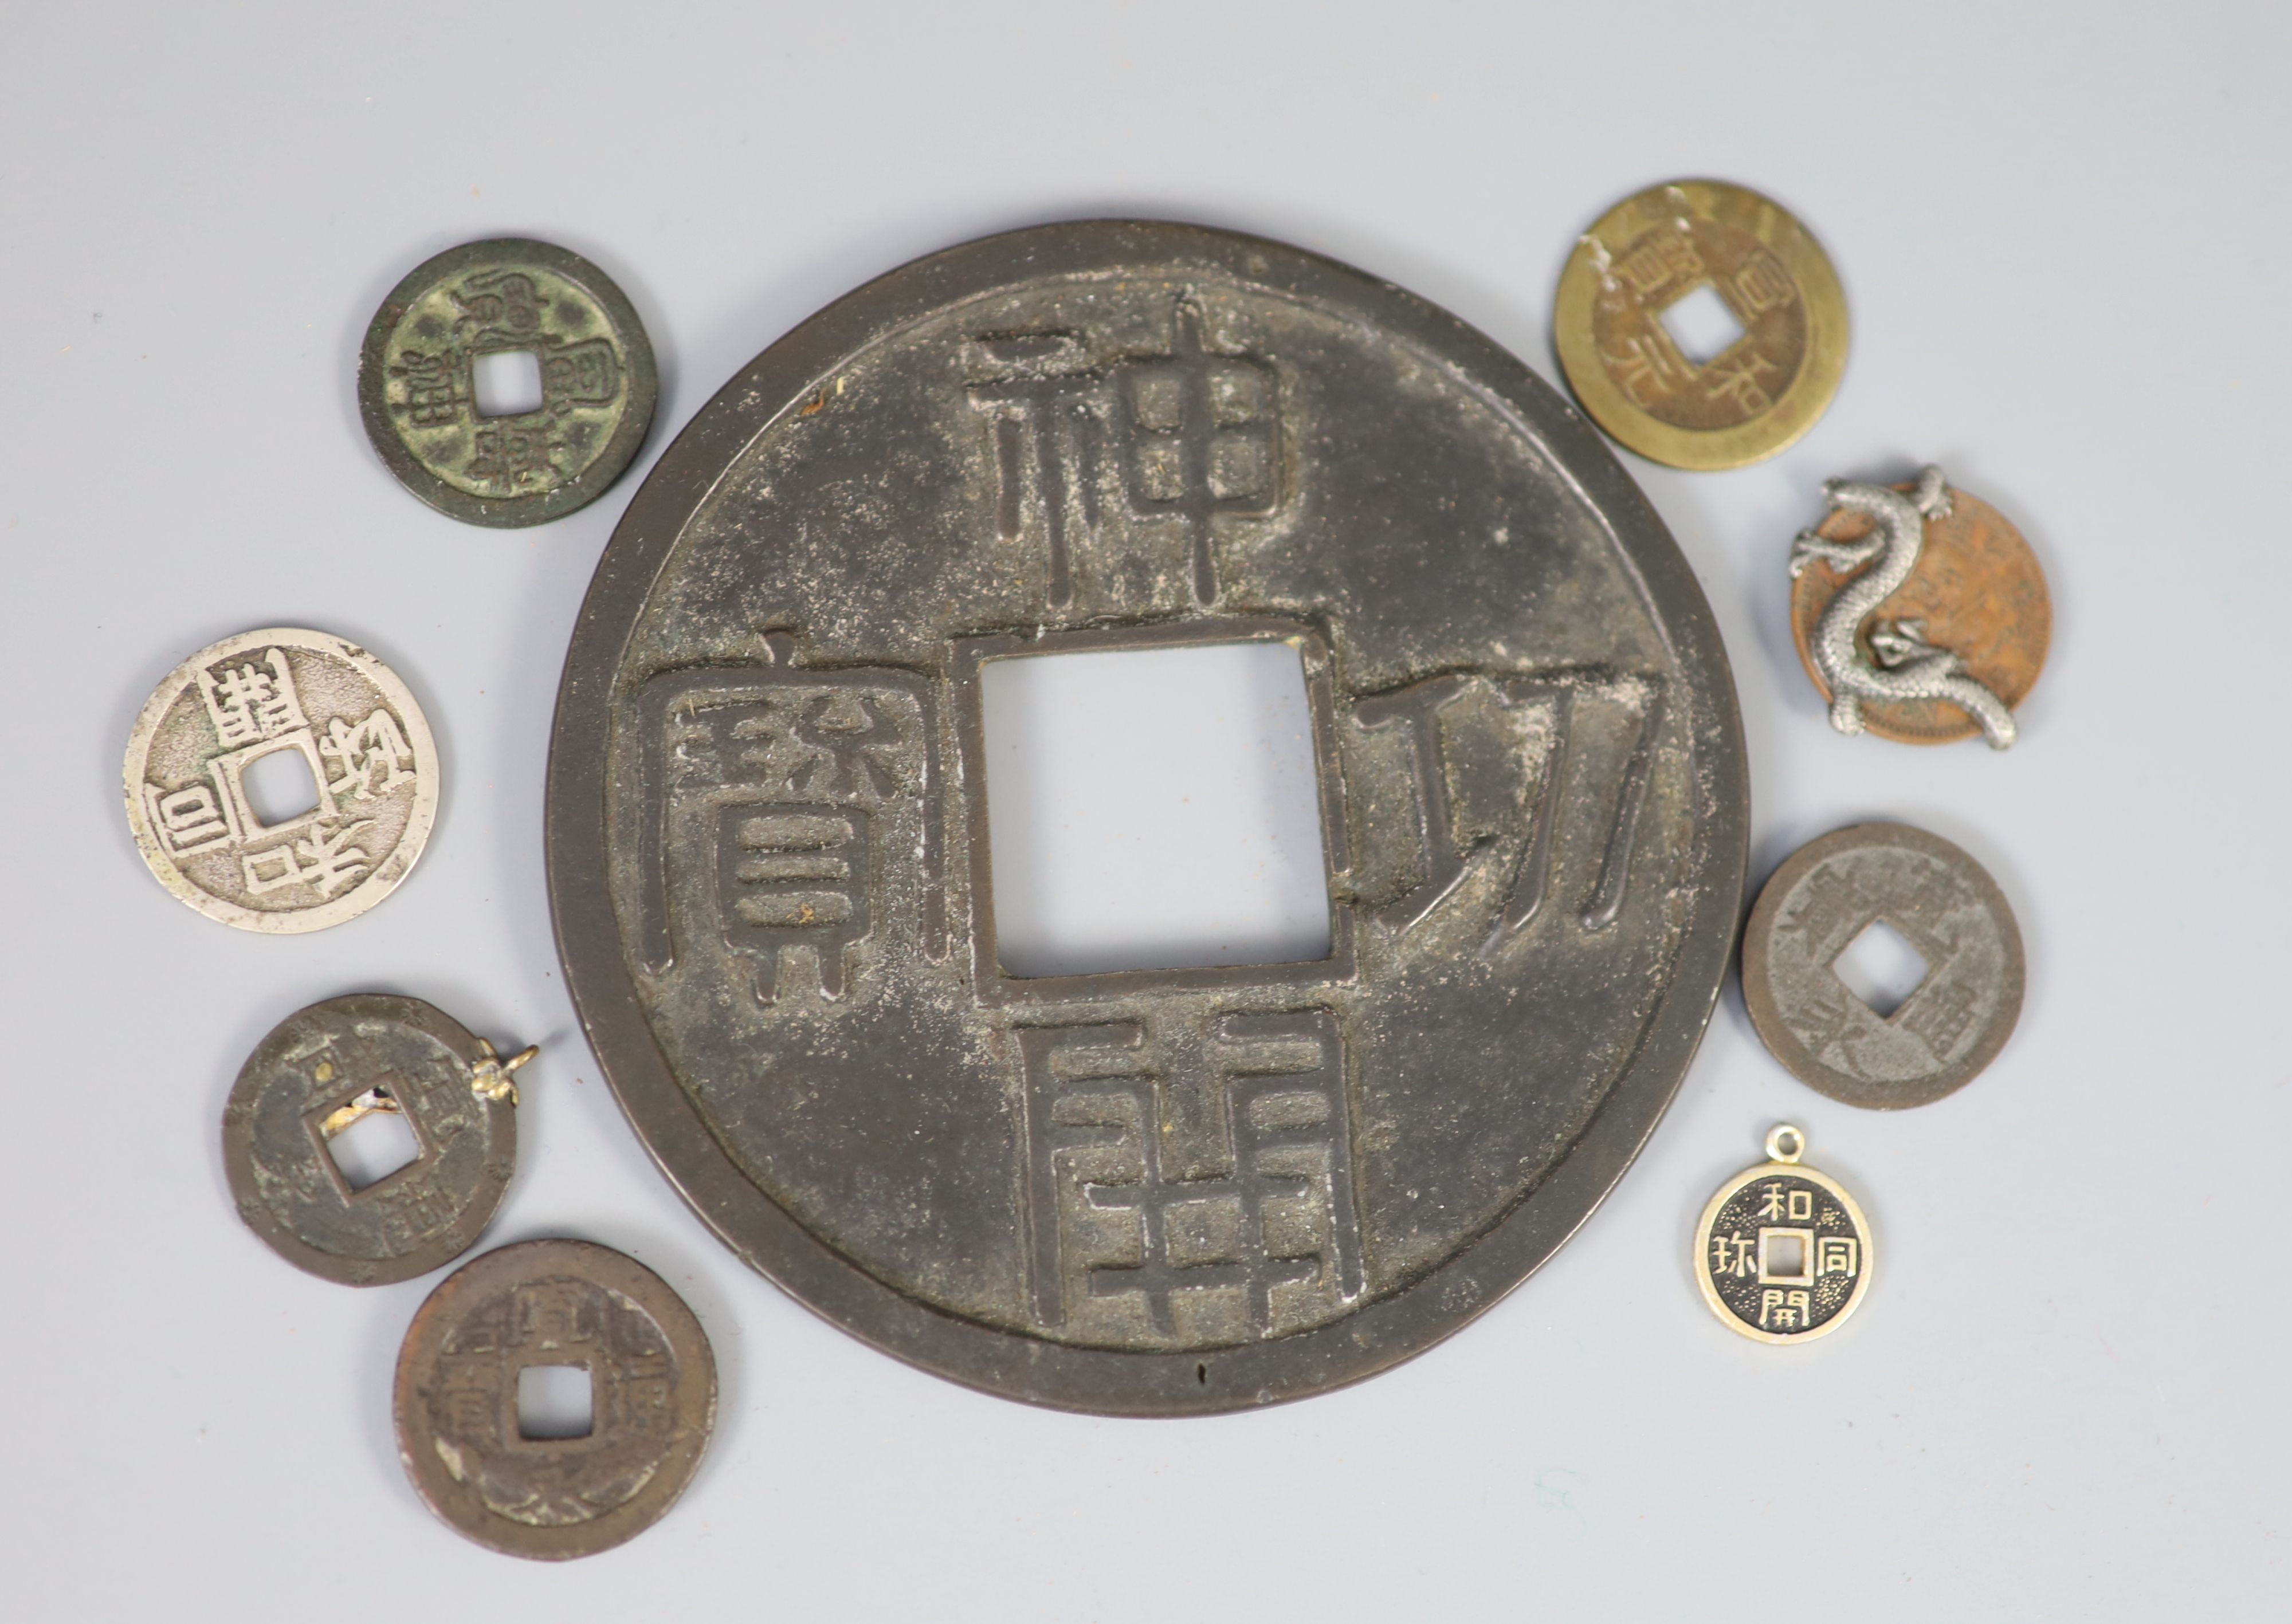 A group of Japanese bronze coin charms or amulets, 19th/20th century,